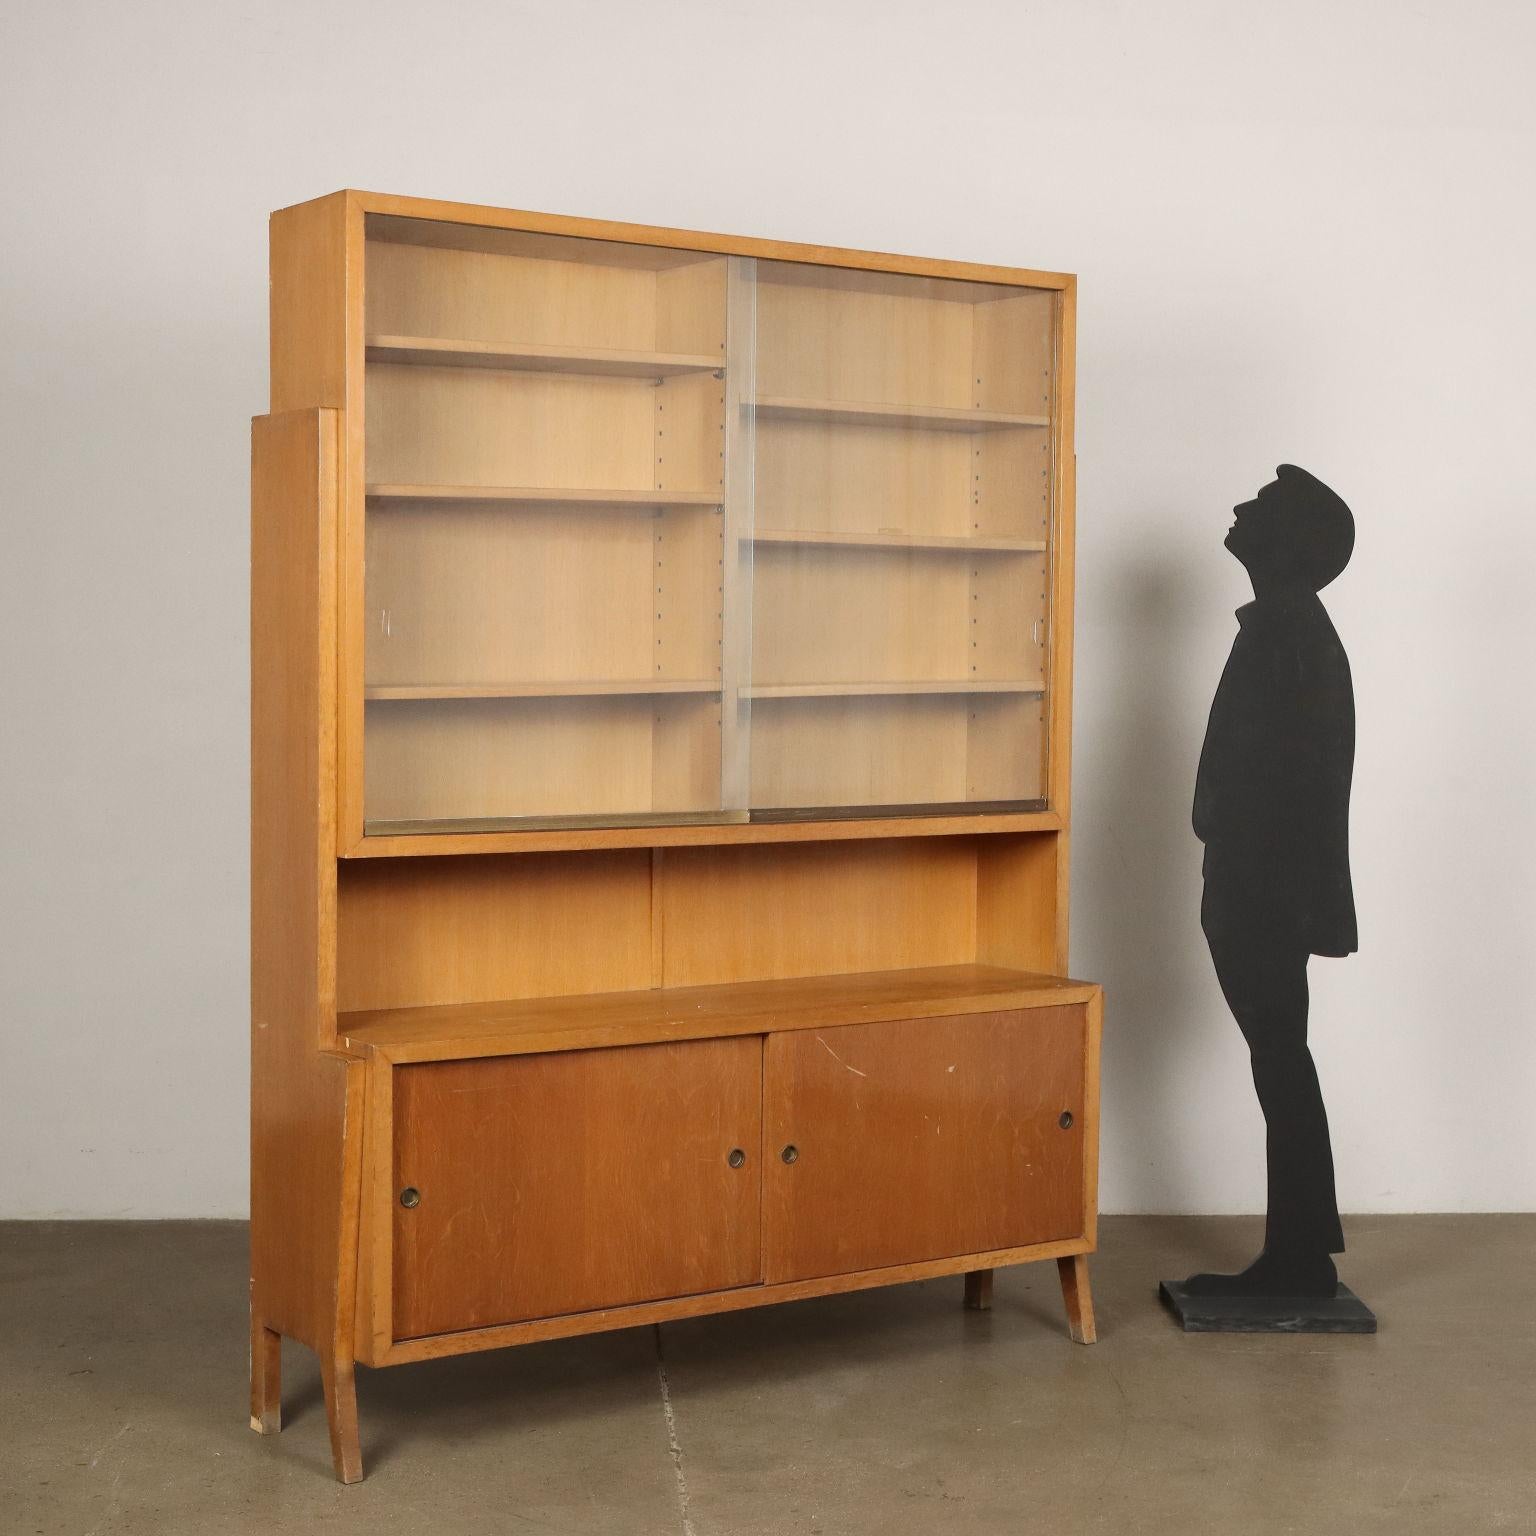 Bookcase unit with sliding glass doors and storage compartment with sliding doors in oak veneered wood.